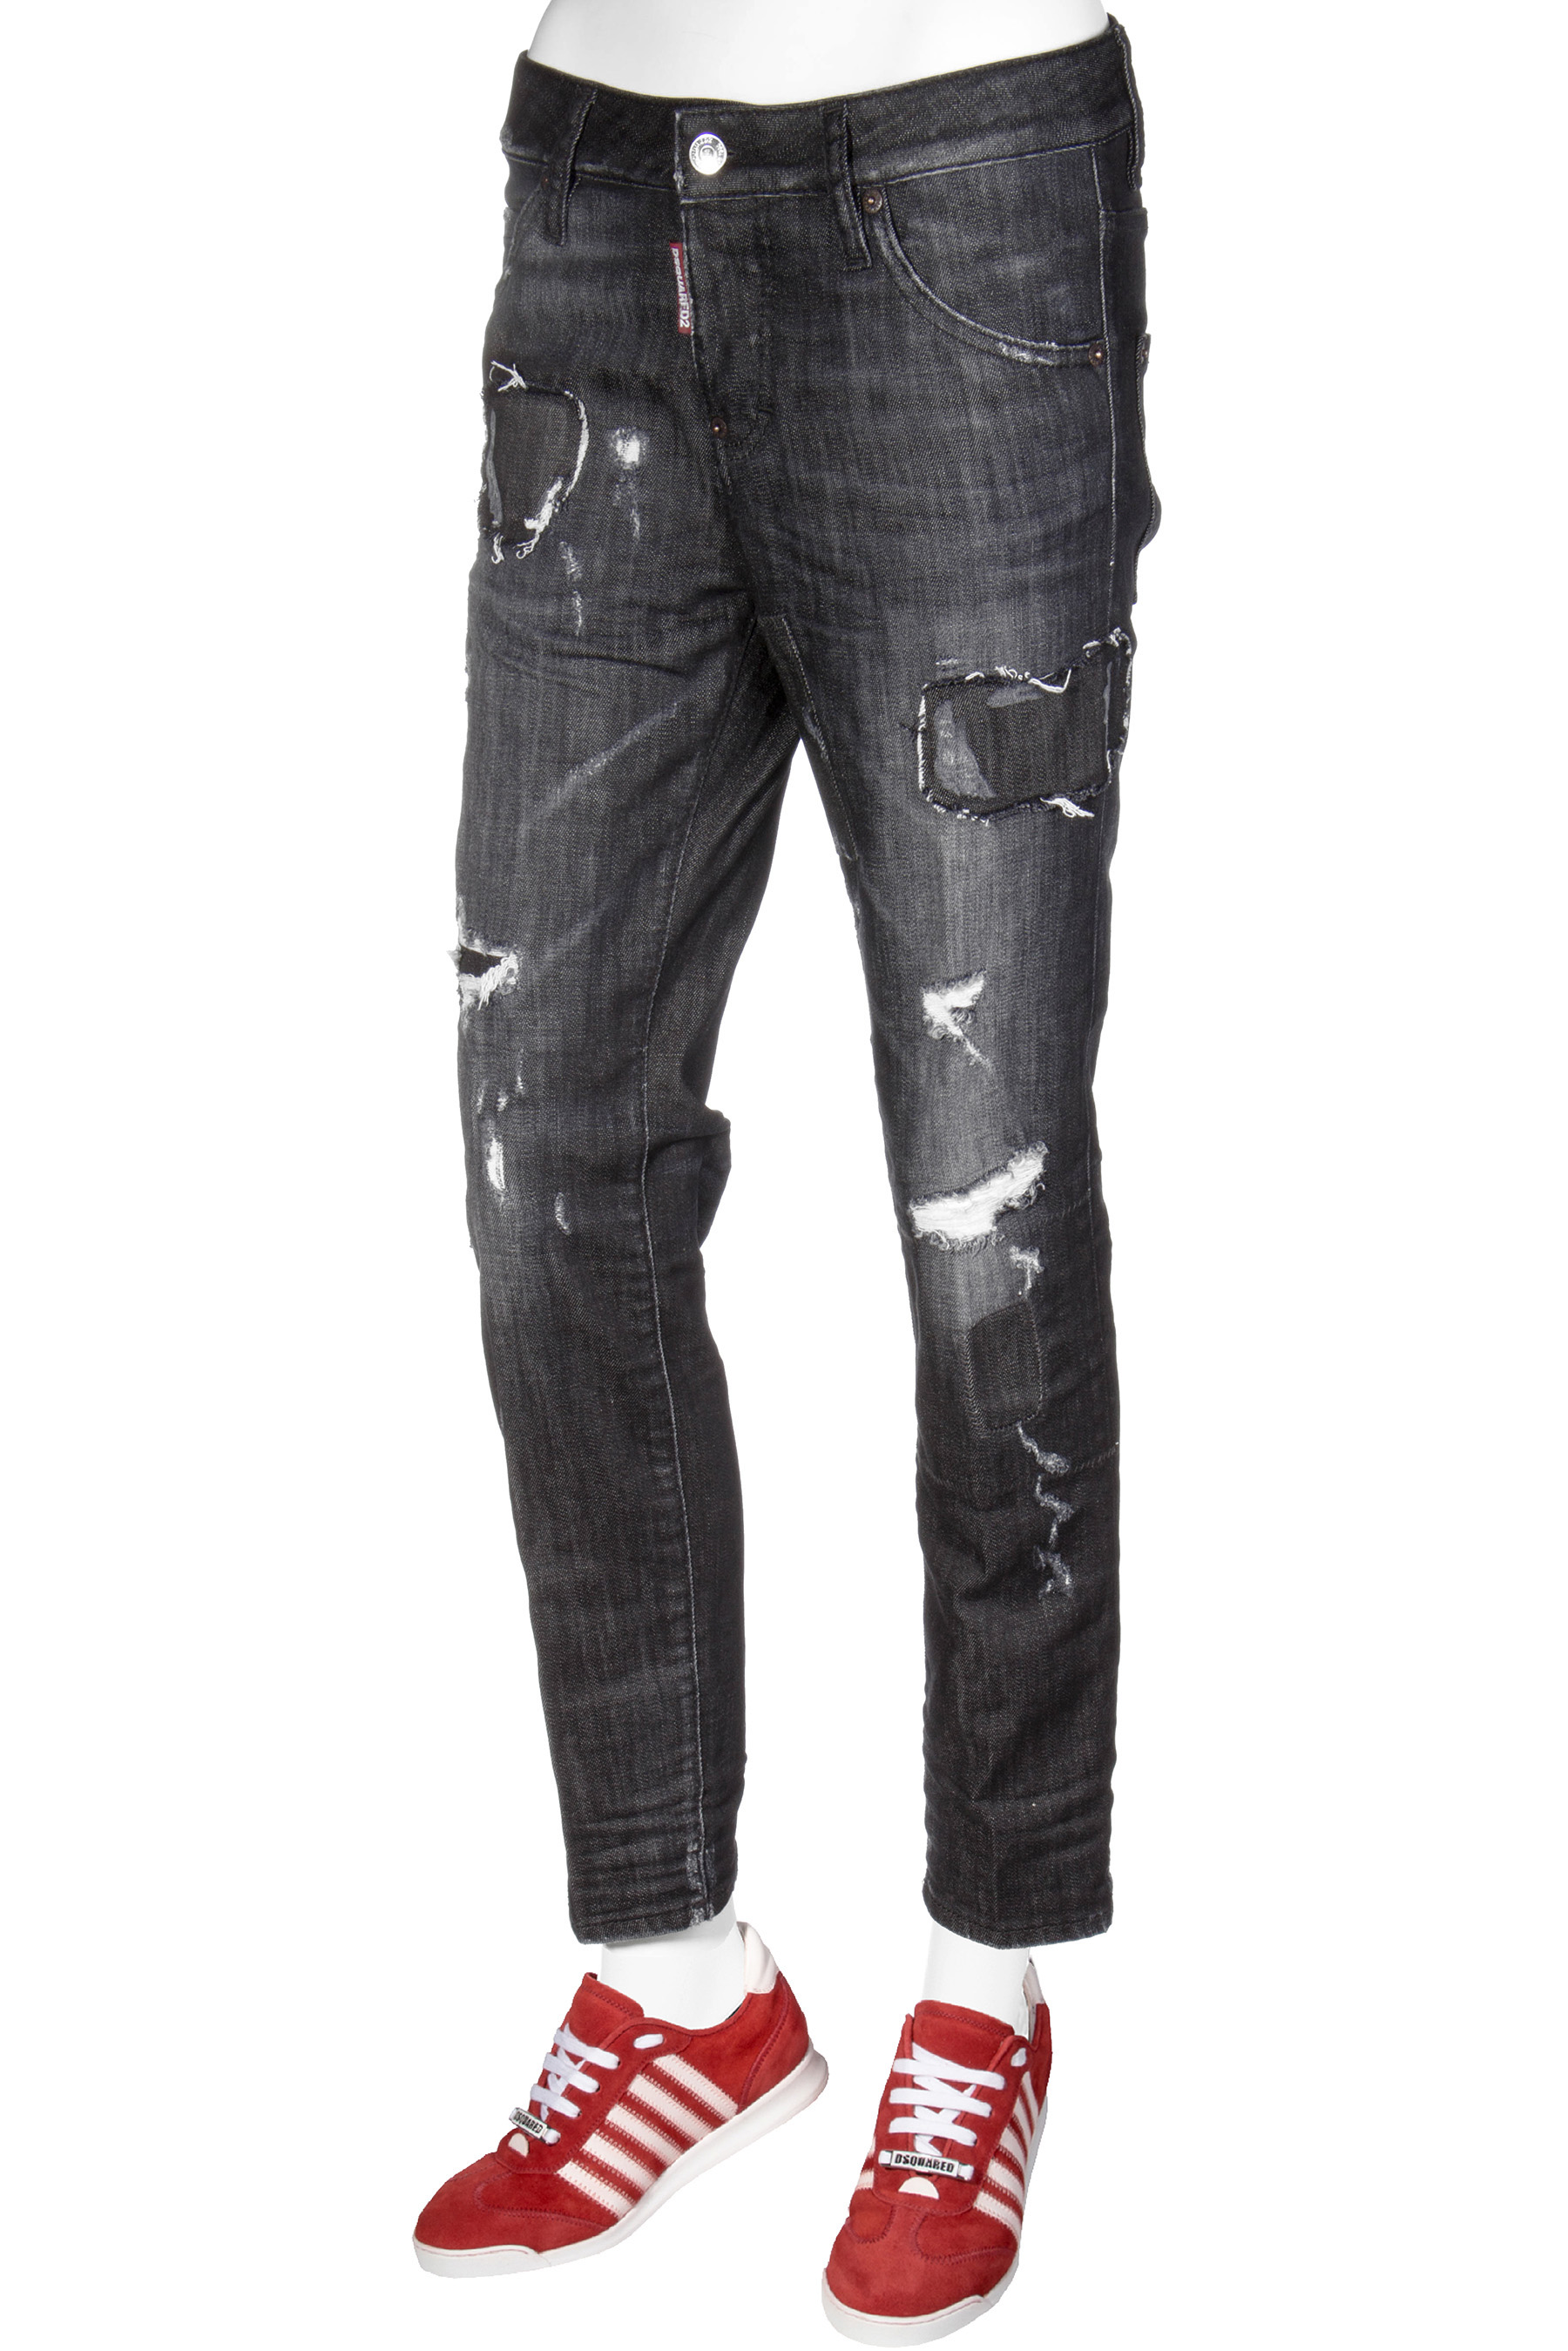 dsquared2 jeans grey